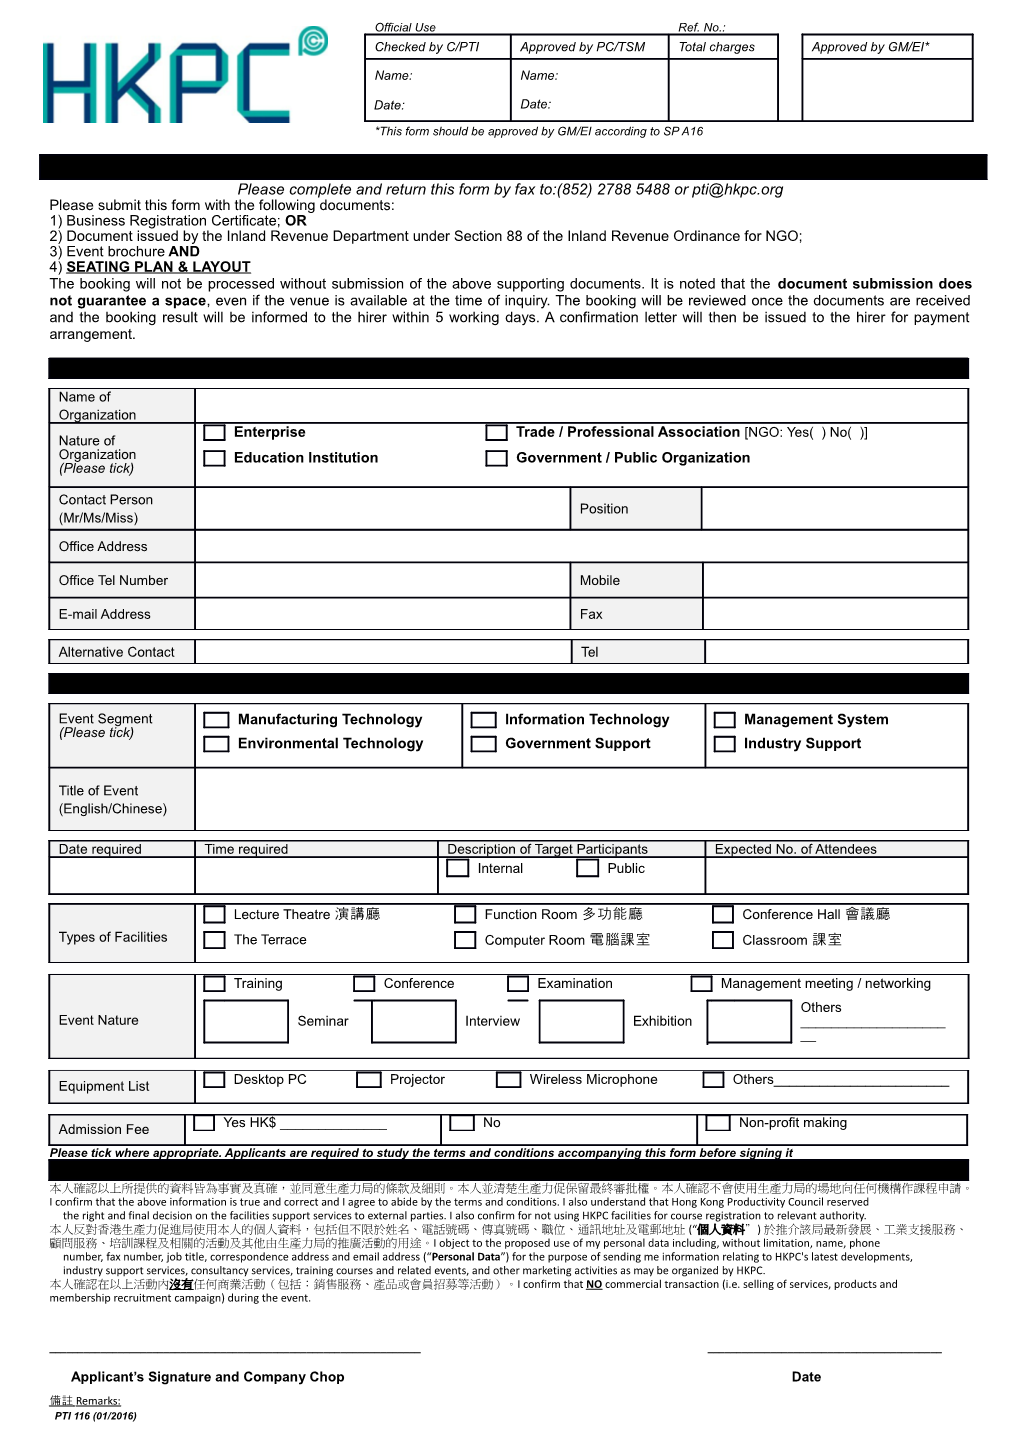 LT3 and LW Application Form